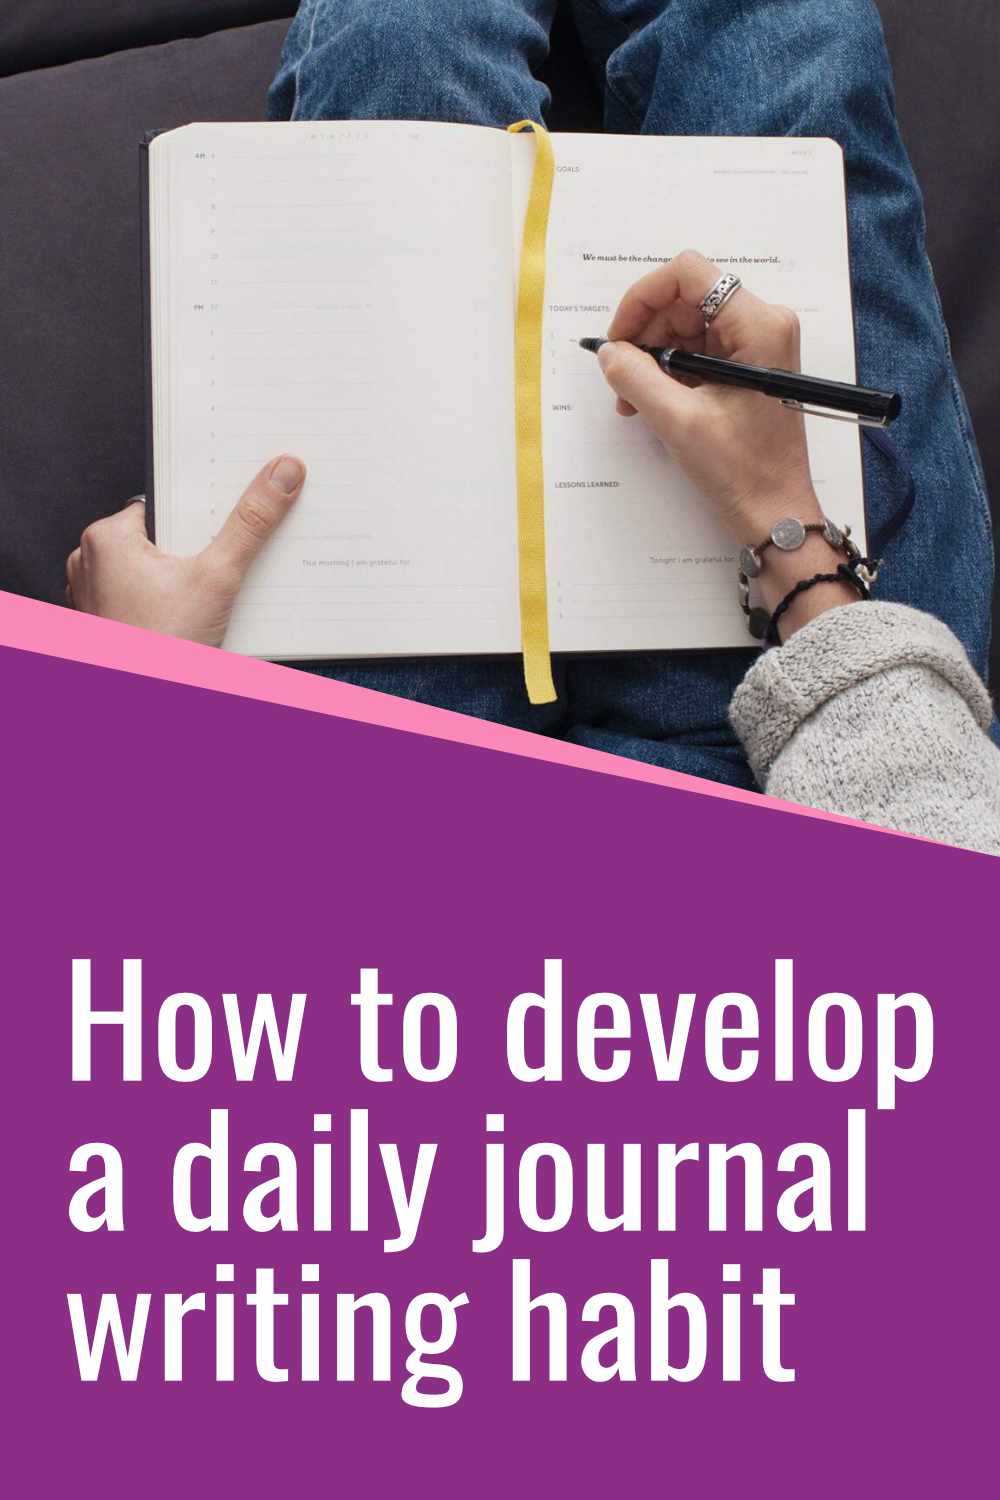 Guide to developing a daily journaling habit.